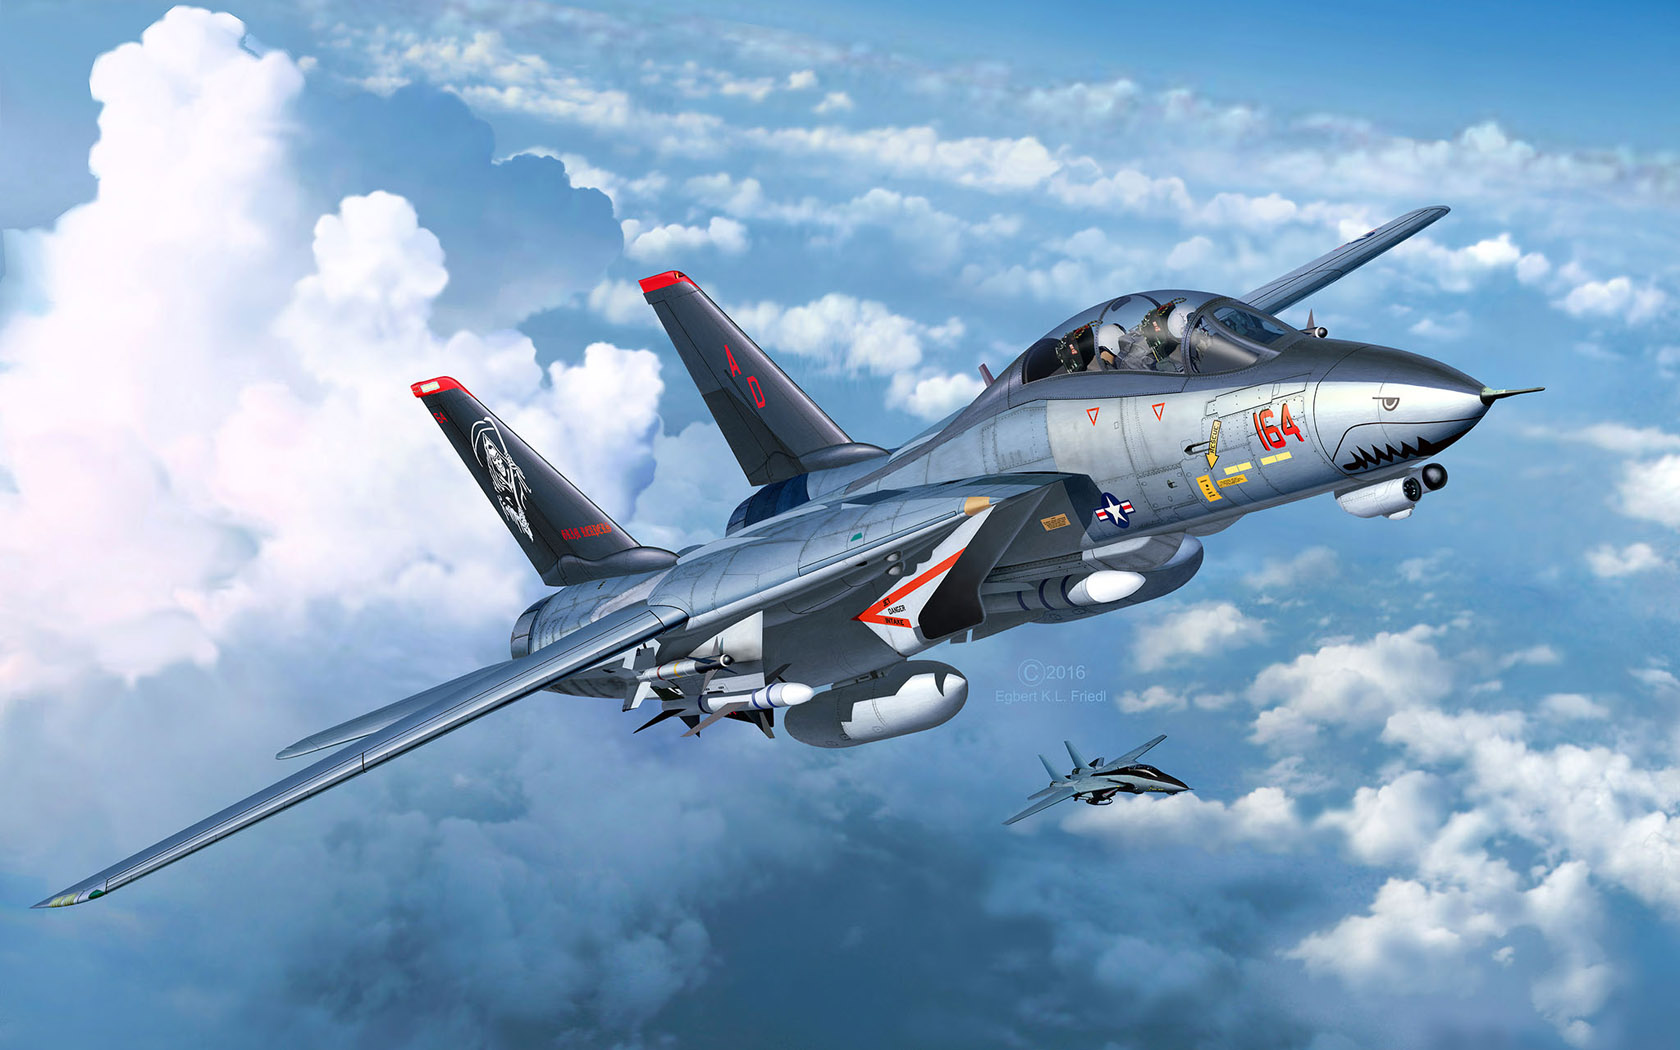 General 1680x1050 aircraft flying military sky military vehicle artwork clouds missiles F-14 Tomcat United States Navy jet fighter Boxart Egbert Friedl